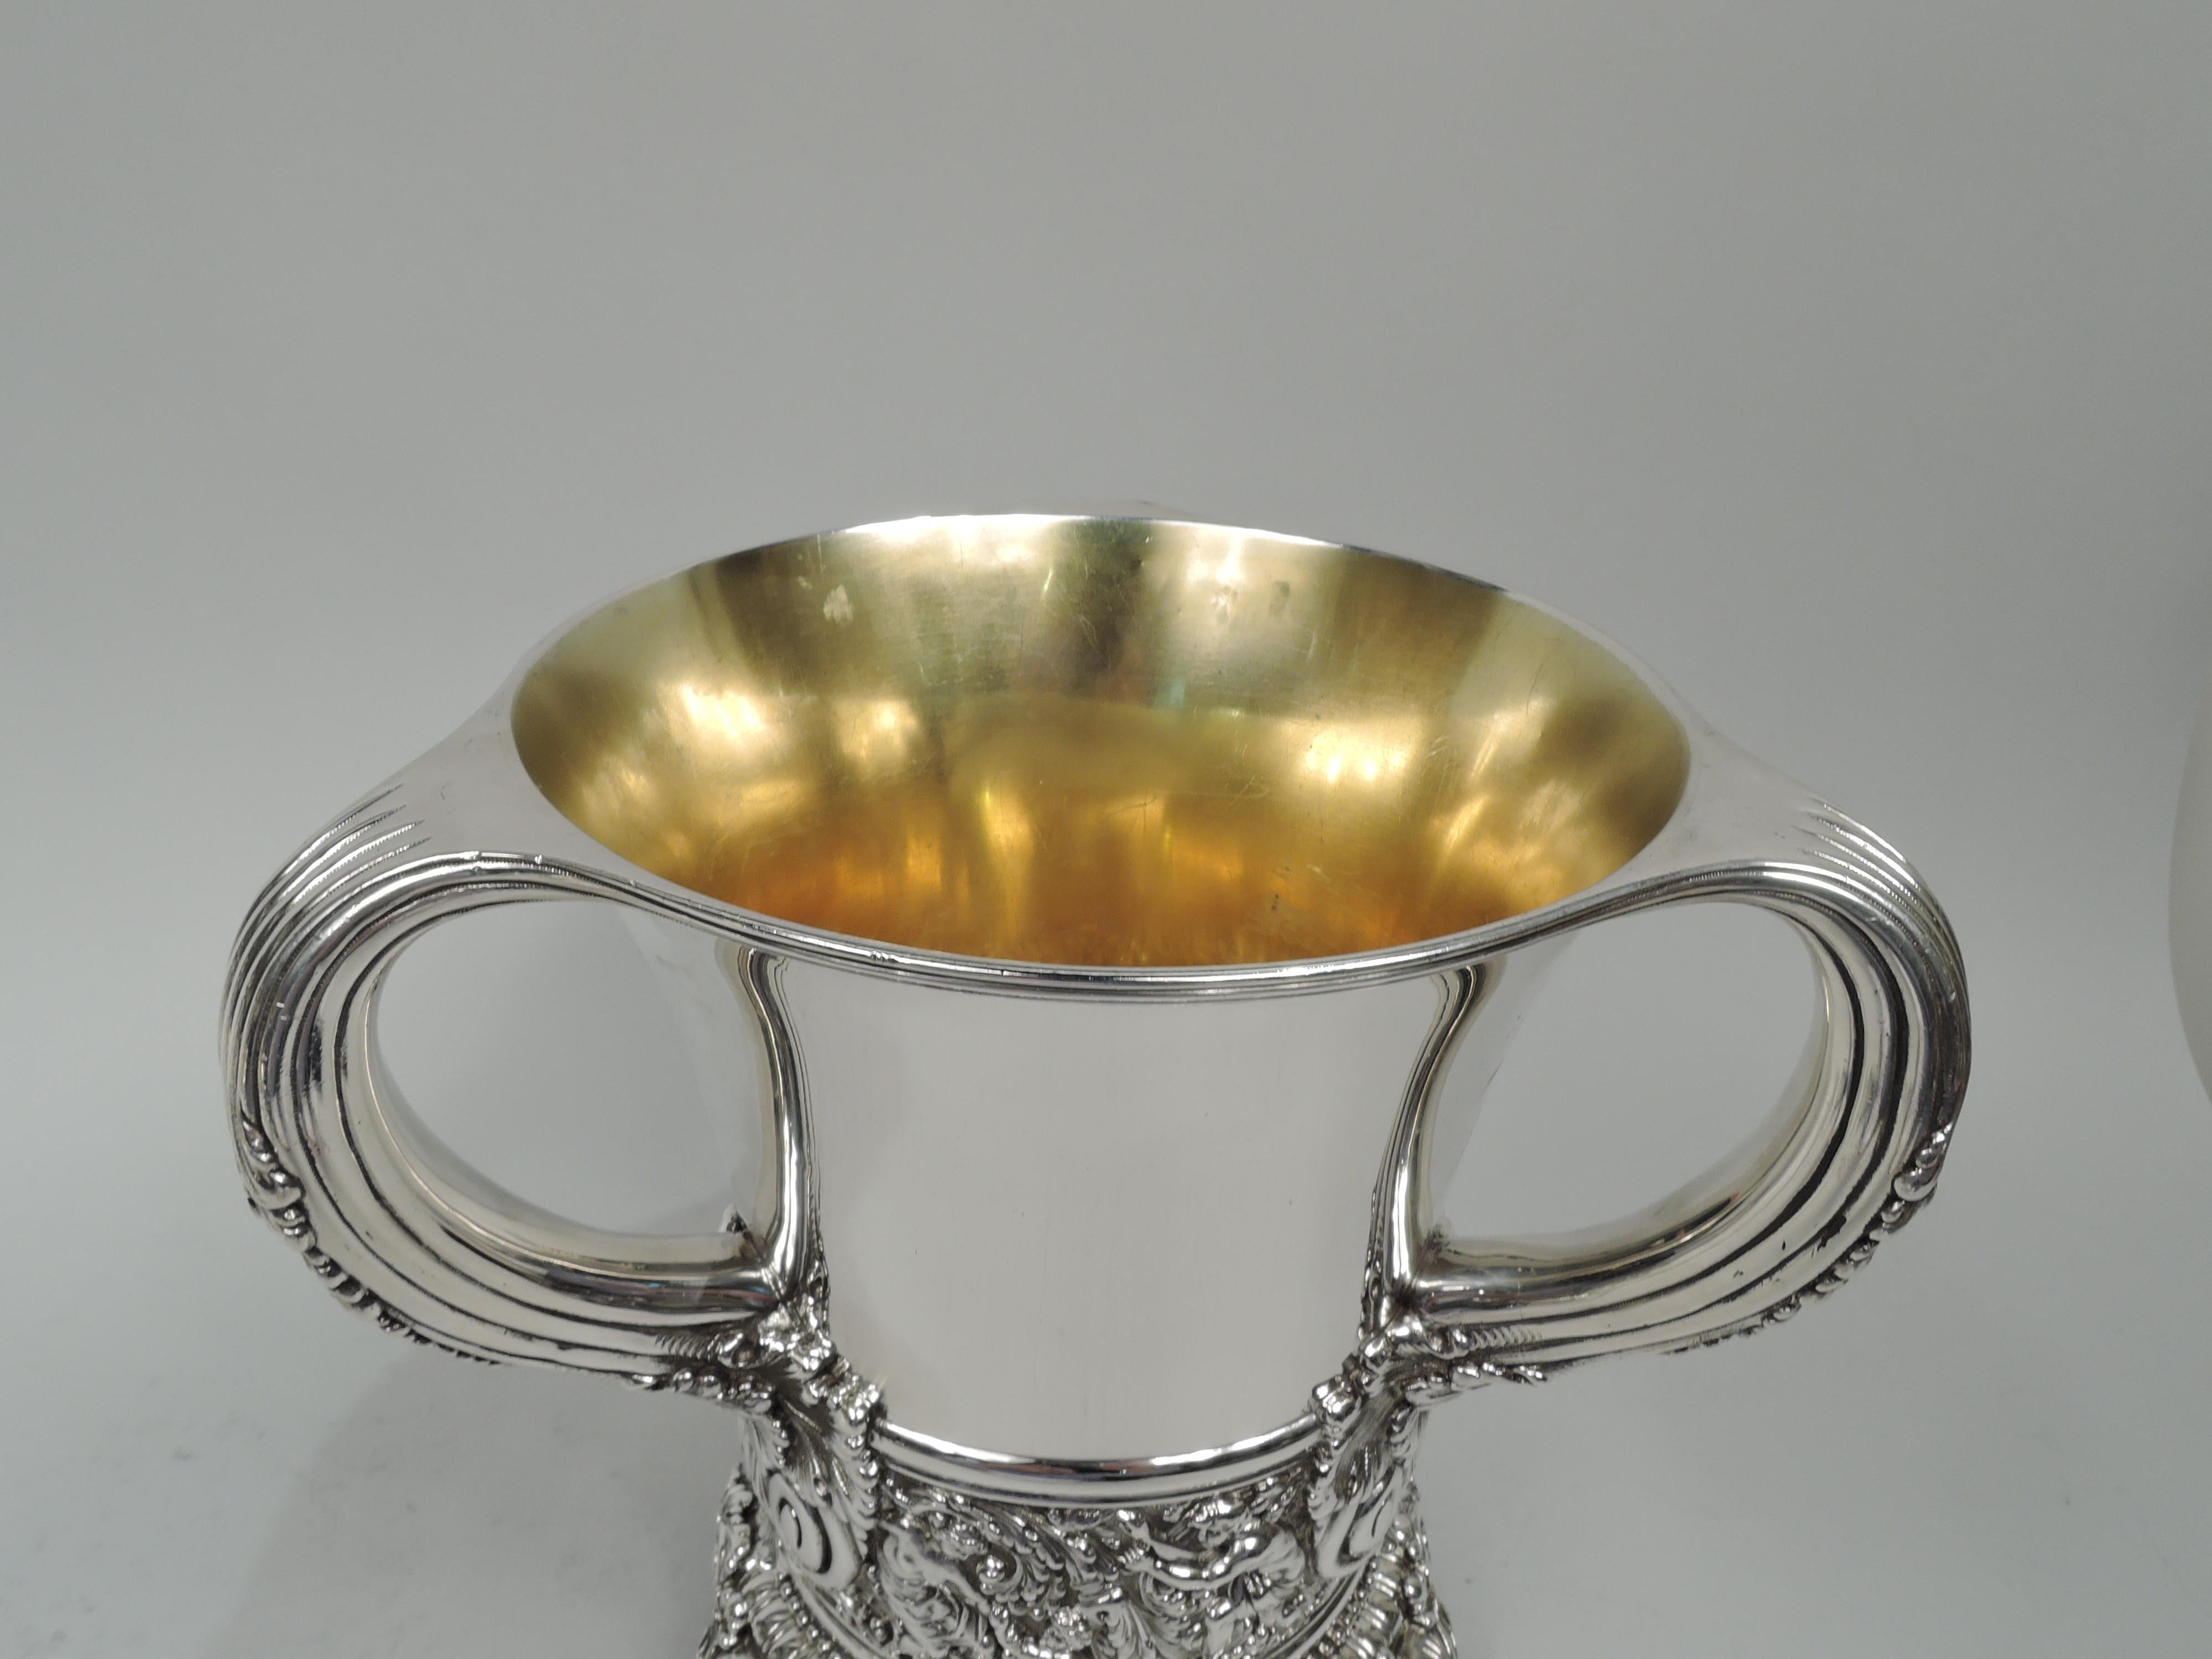 Olympian sterling silver wine cooler. Made by Tiffany & Co. in New York. Each: Round with gently tapering sides and three reeded c-scroll handles with leaf mounts and caps. Foot ring with beading and bead-and-reel ornament, and 3 paw supports with